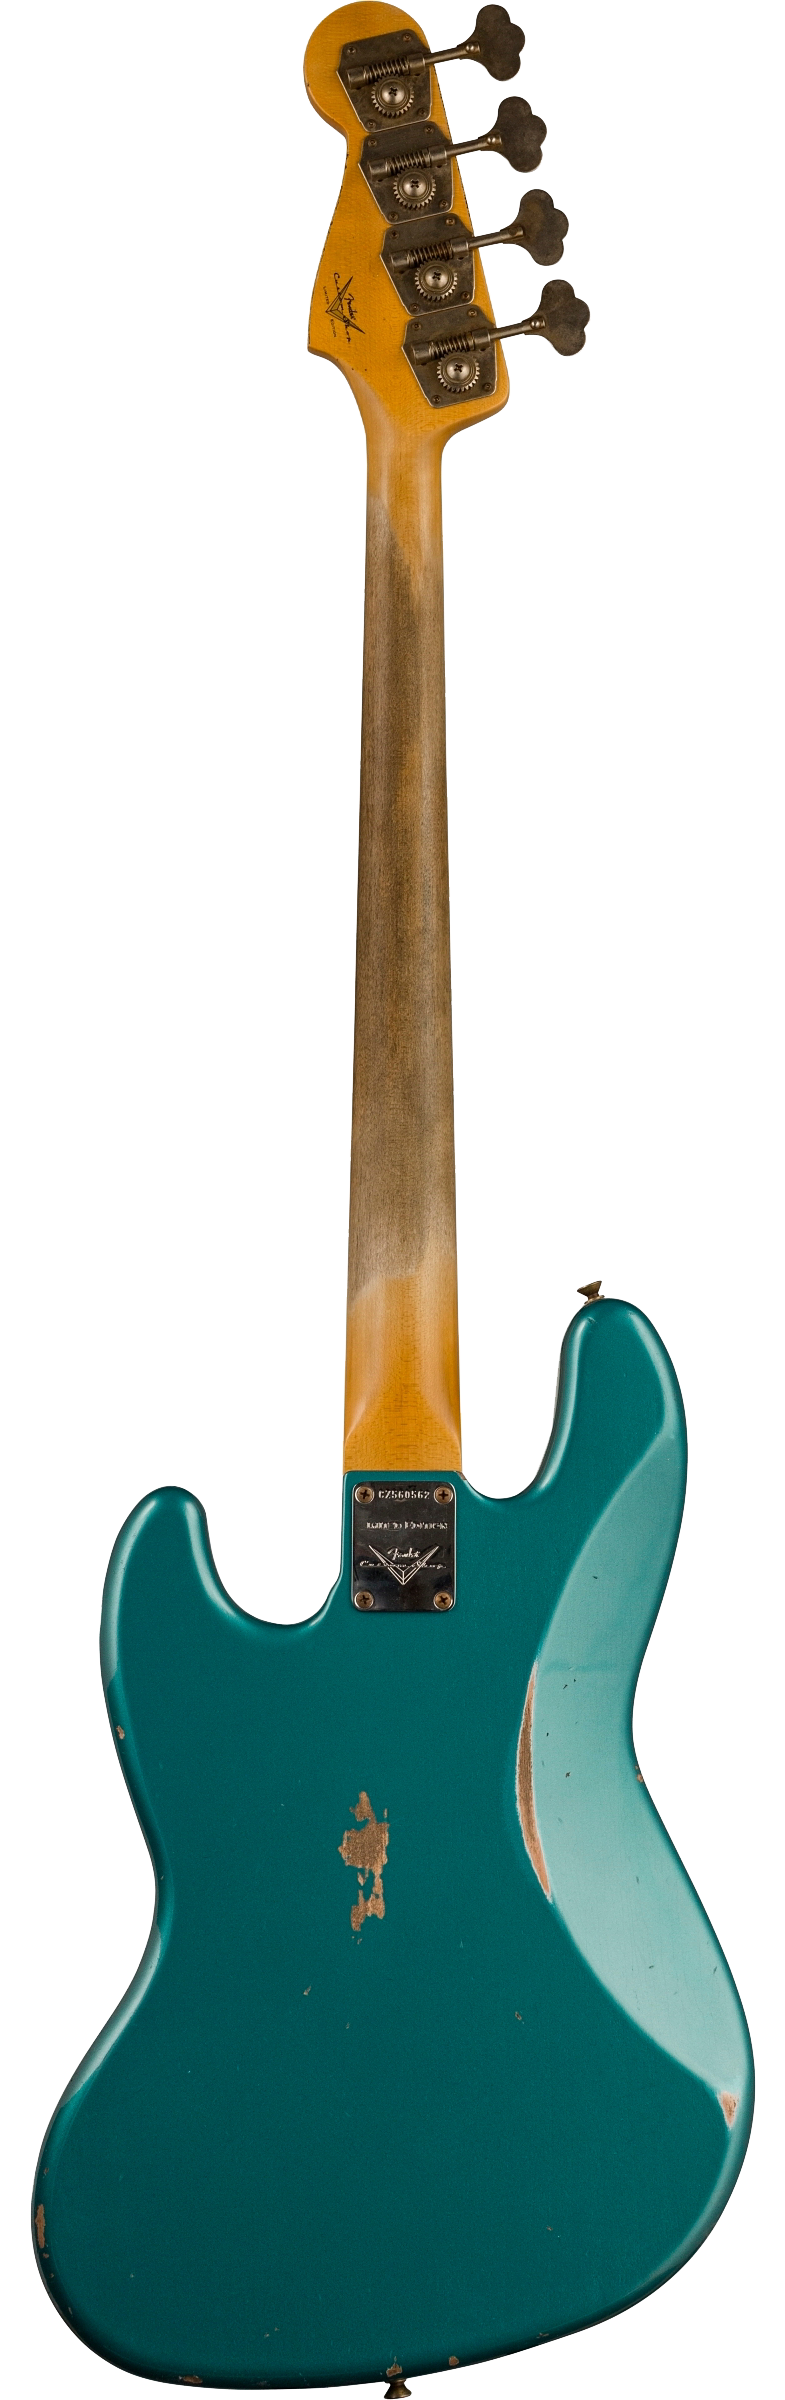 Fender Custom Shop Limited Edition 60 Jazz Bass Relic Aged Ocean Turquoise w/case